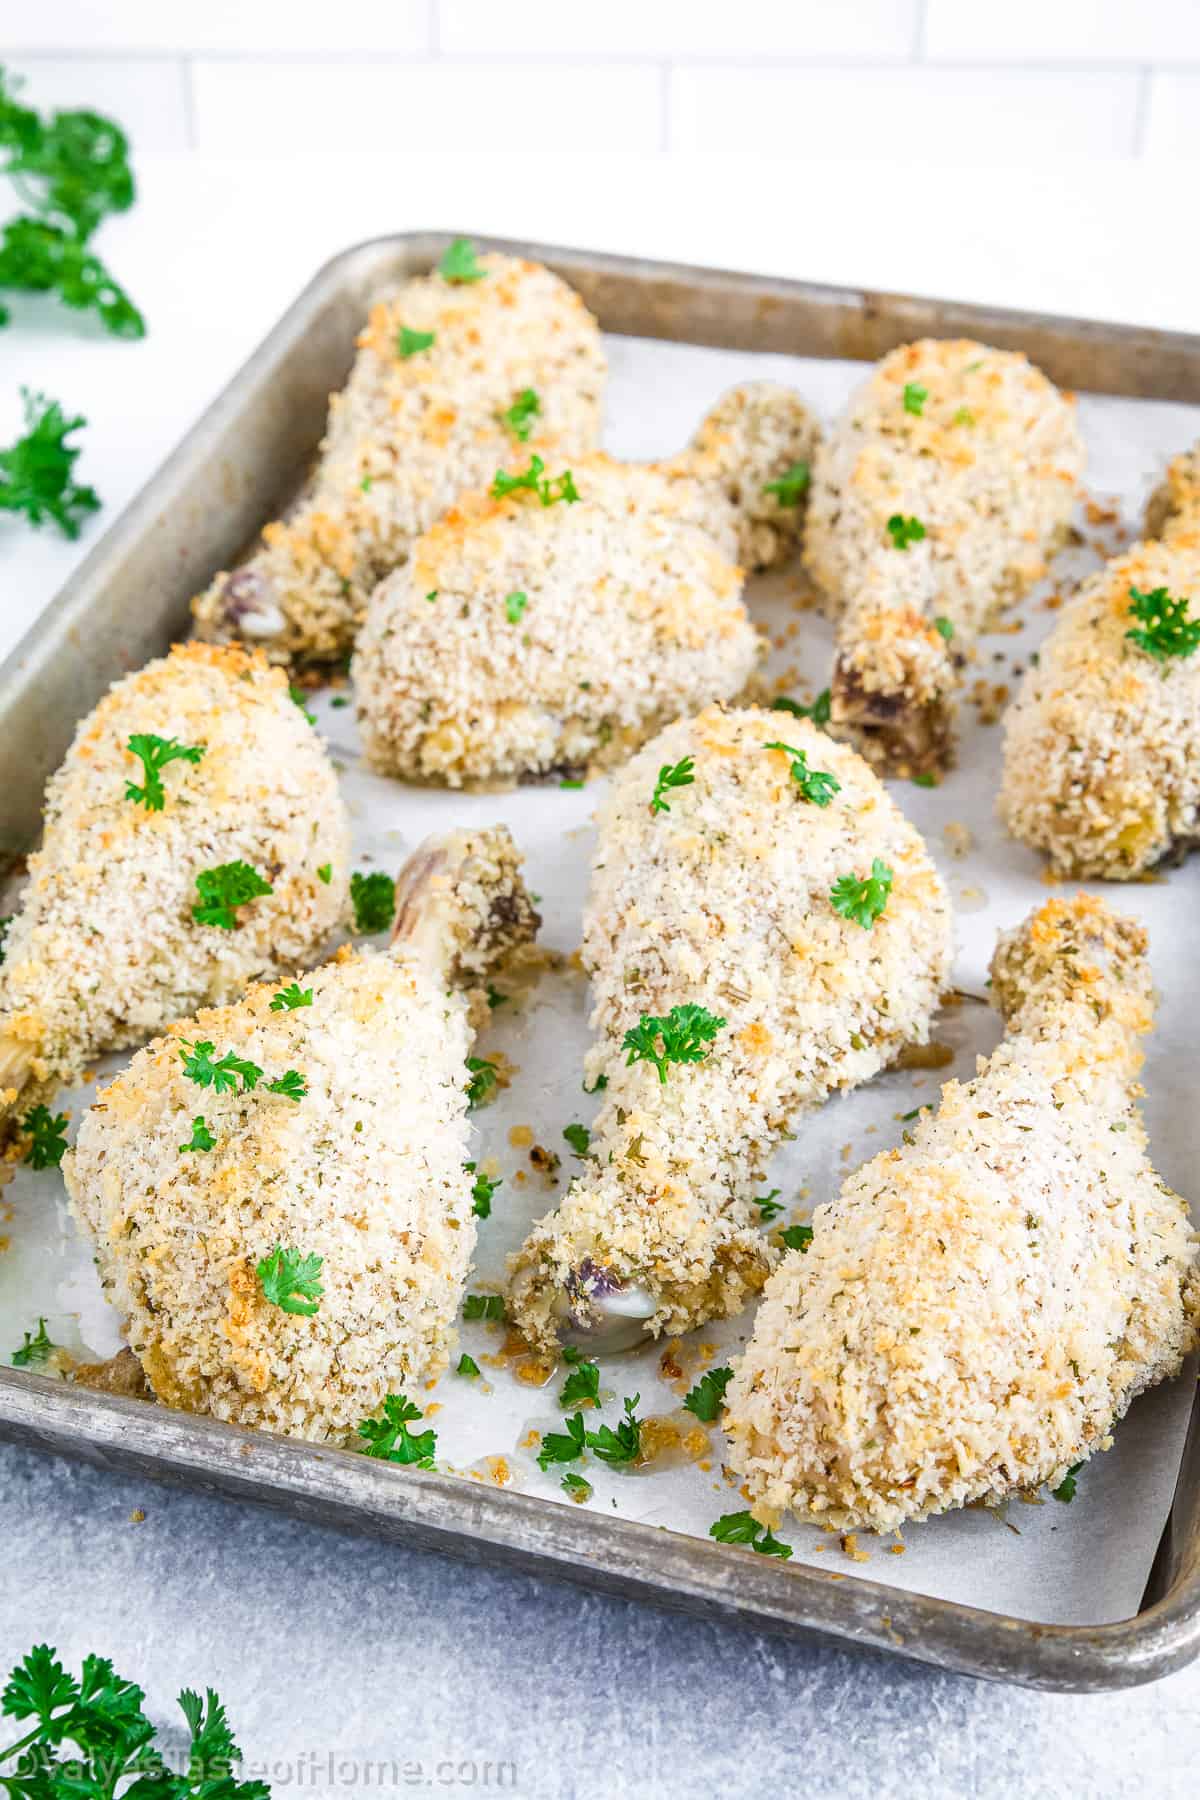 This baked breaded chicken drumsticks recipe is your ticket to a simple, yet incredibly flavorful dinner.